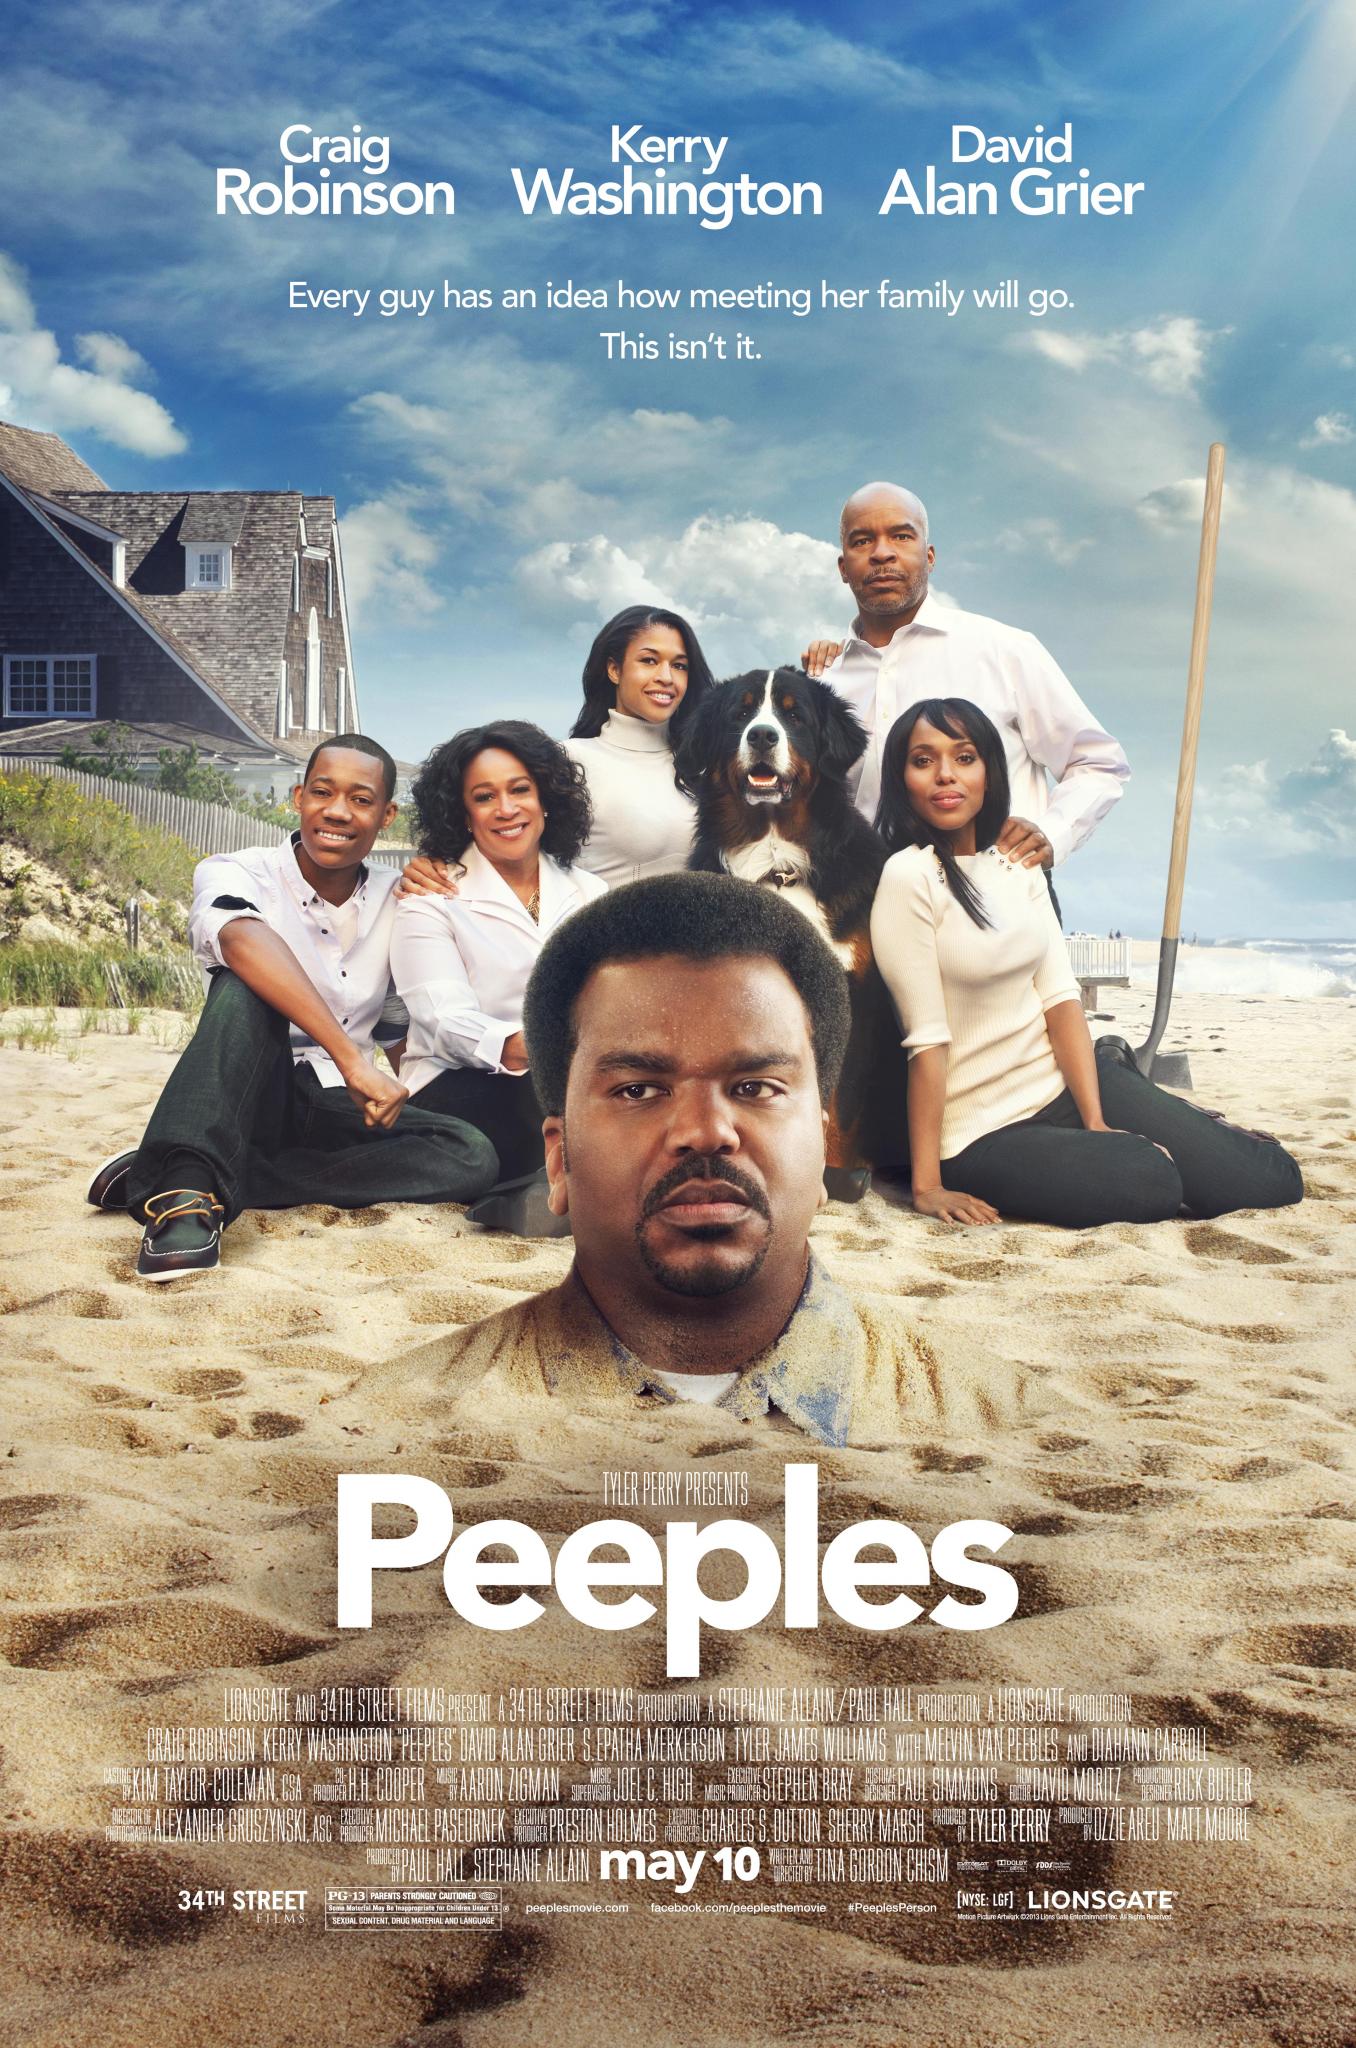 EXCLUSIVE: See the Official 'Peeples' Poster Starring Kerry Washington